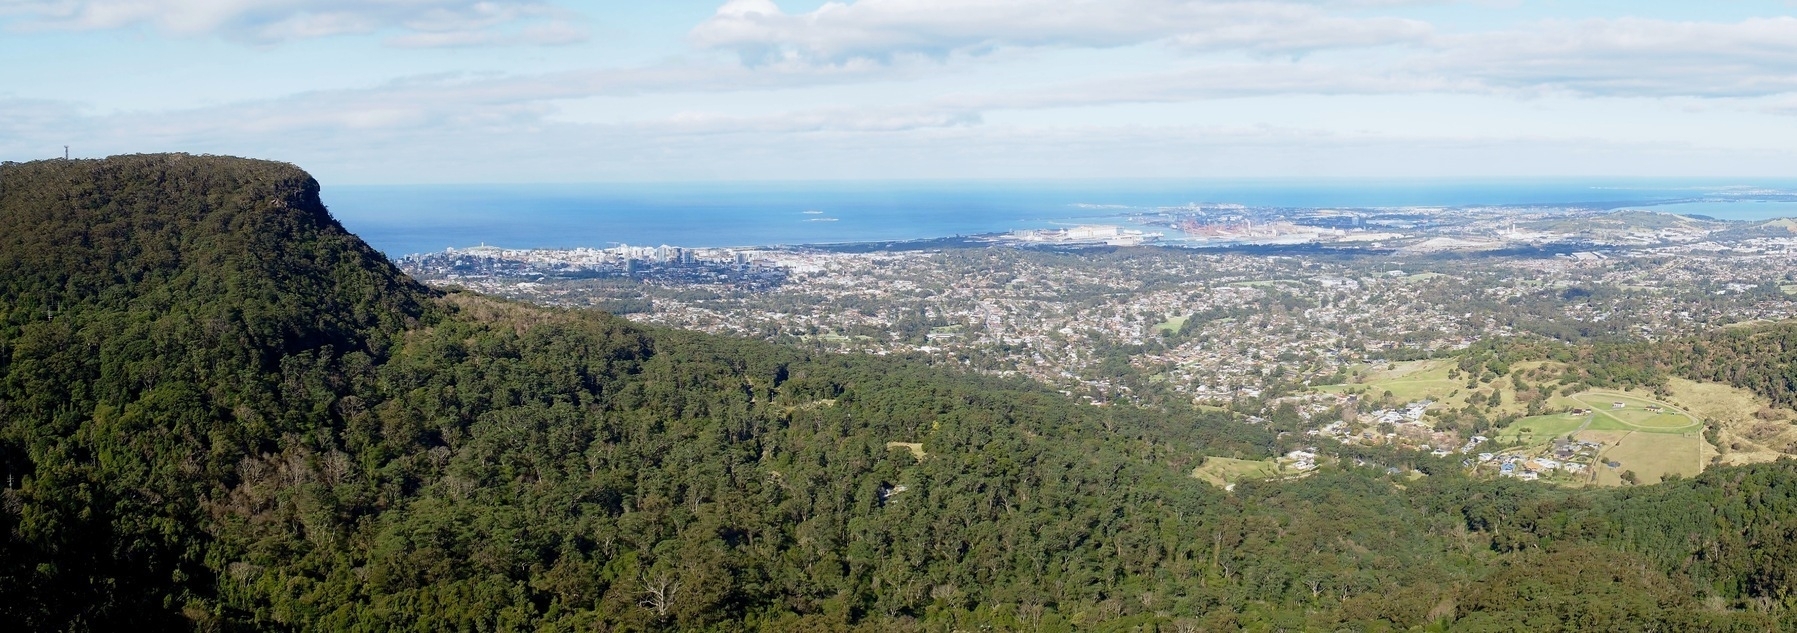 A wide landscape photo showing Geera (Mount Keira) and its foothills to the left, with the lower coastline of Wollongong and its surrounding hills as it stretches to the Tasman Sea